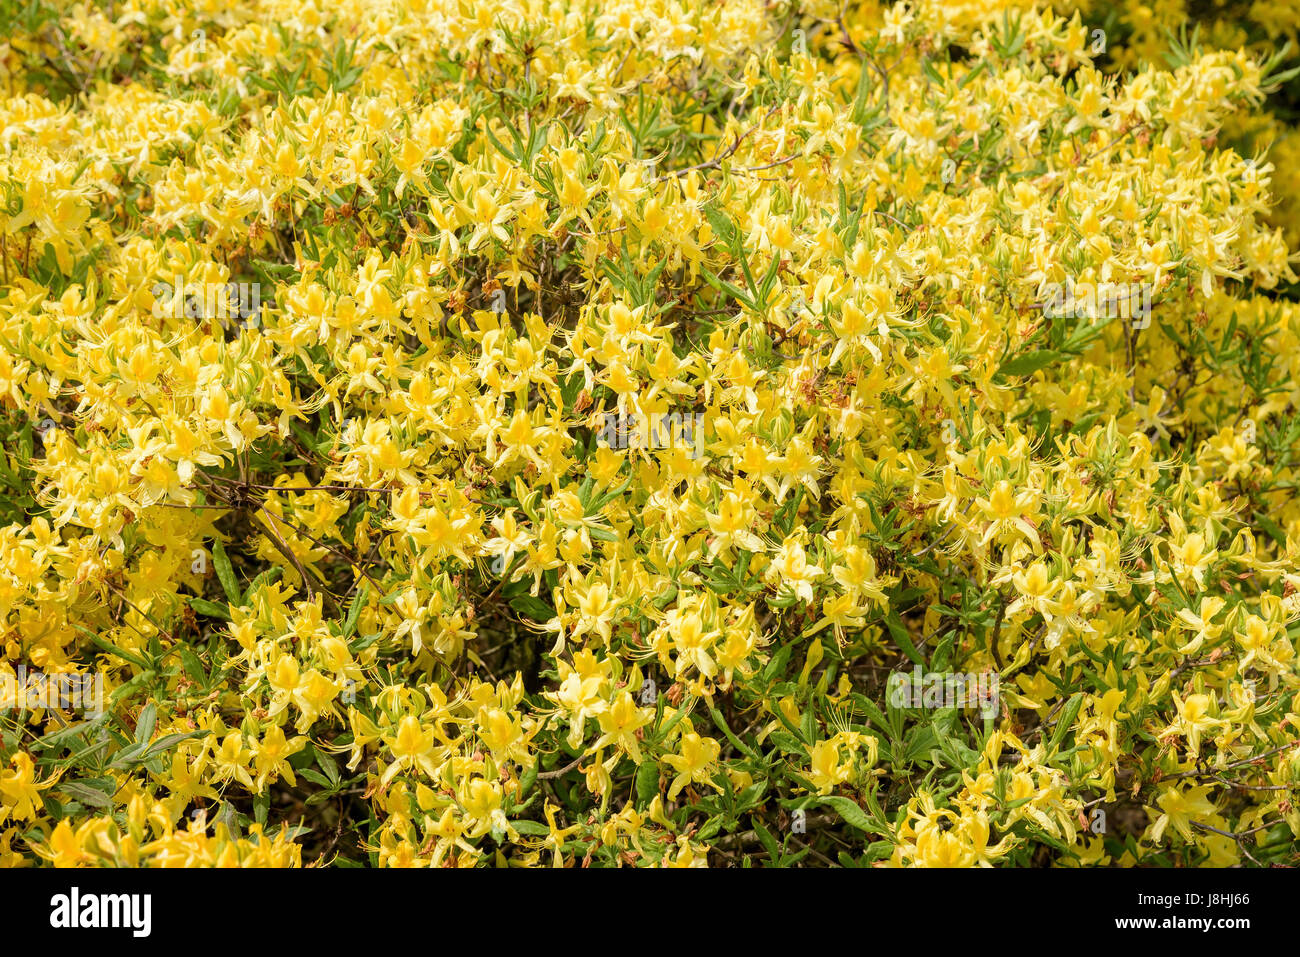 Yellow rhododendron flowers as natural floral background Stock Photo